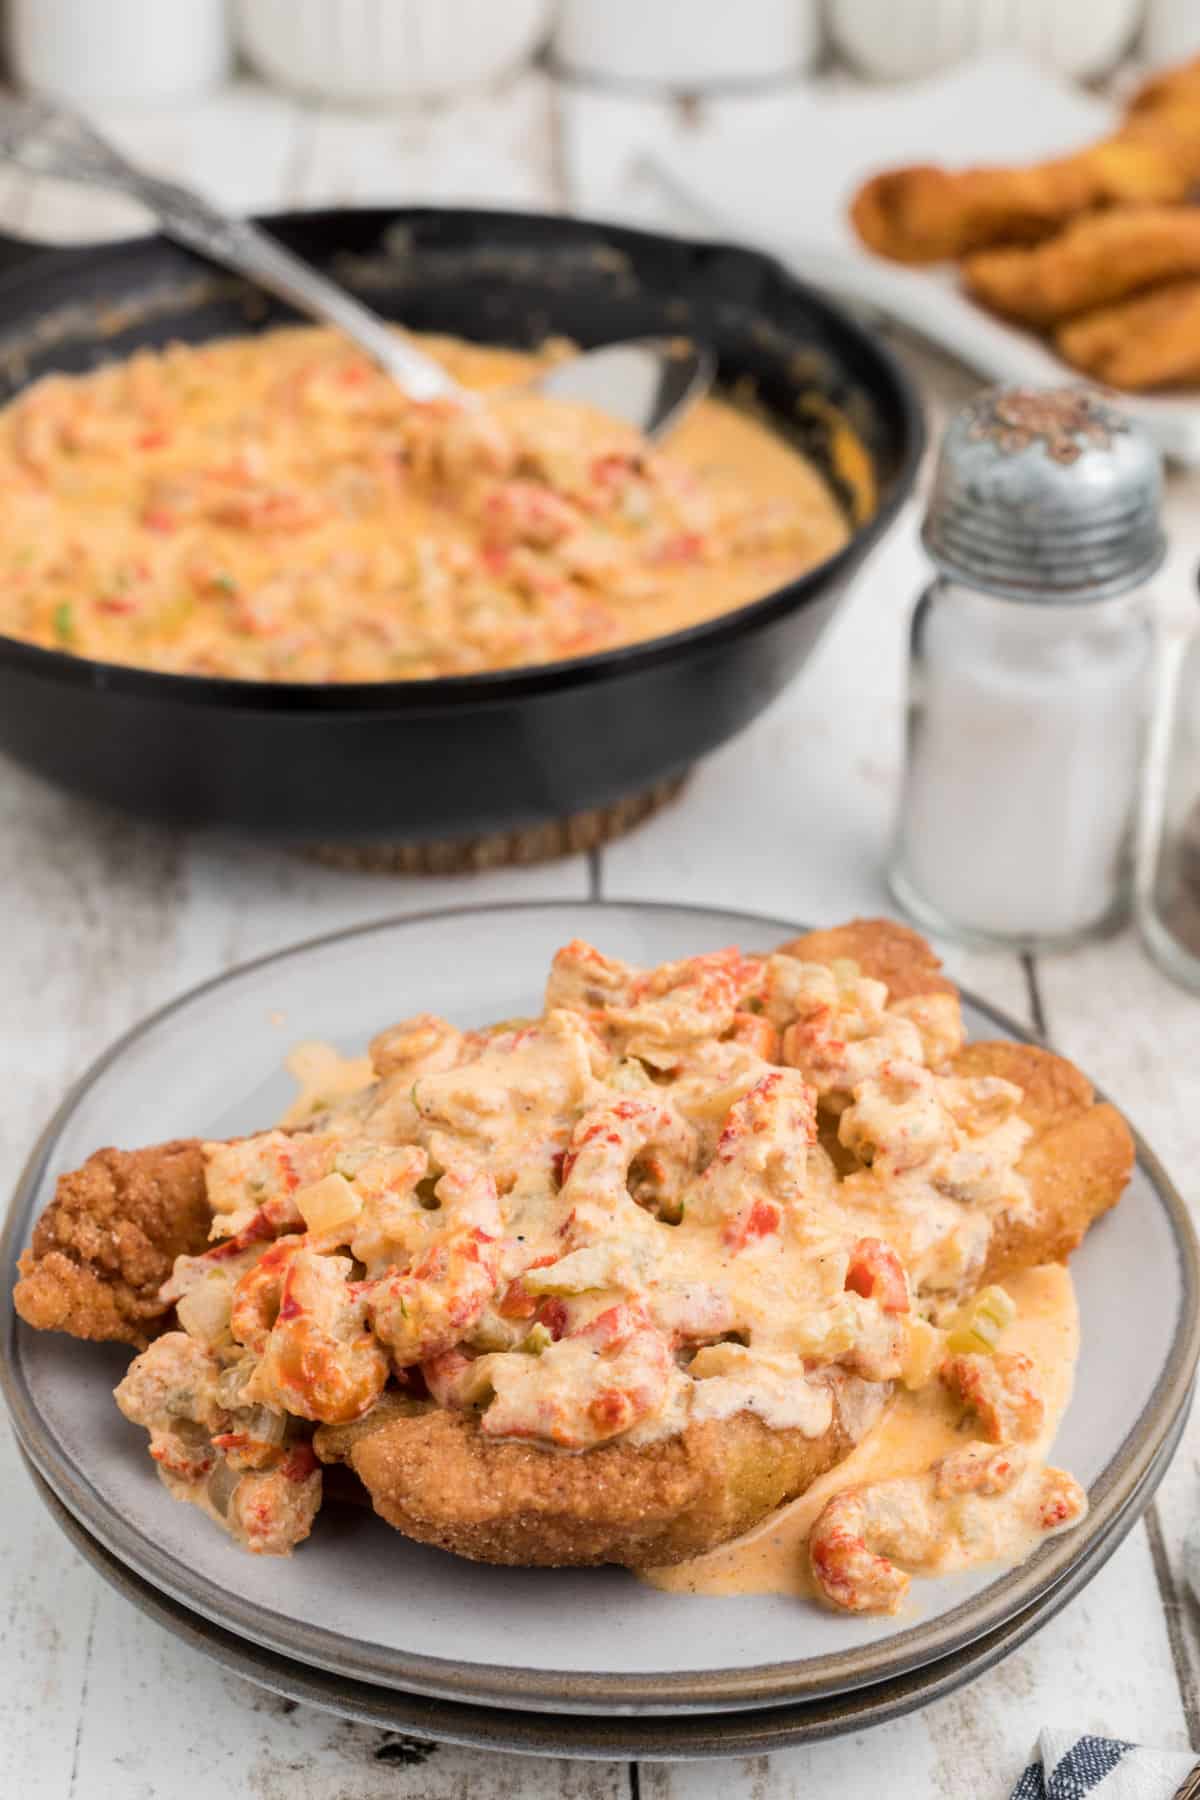 Crawfish sauce poured over fried fish.